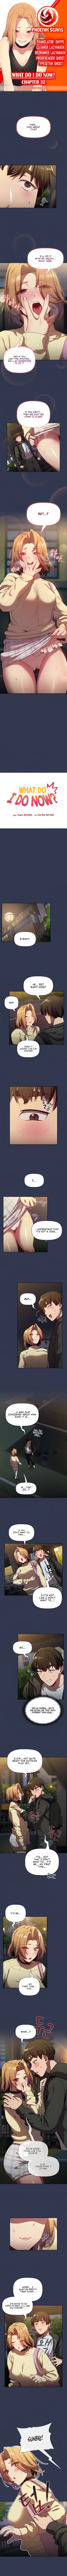 what-do-i-do-now-chap-32-0